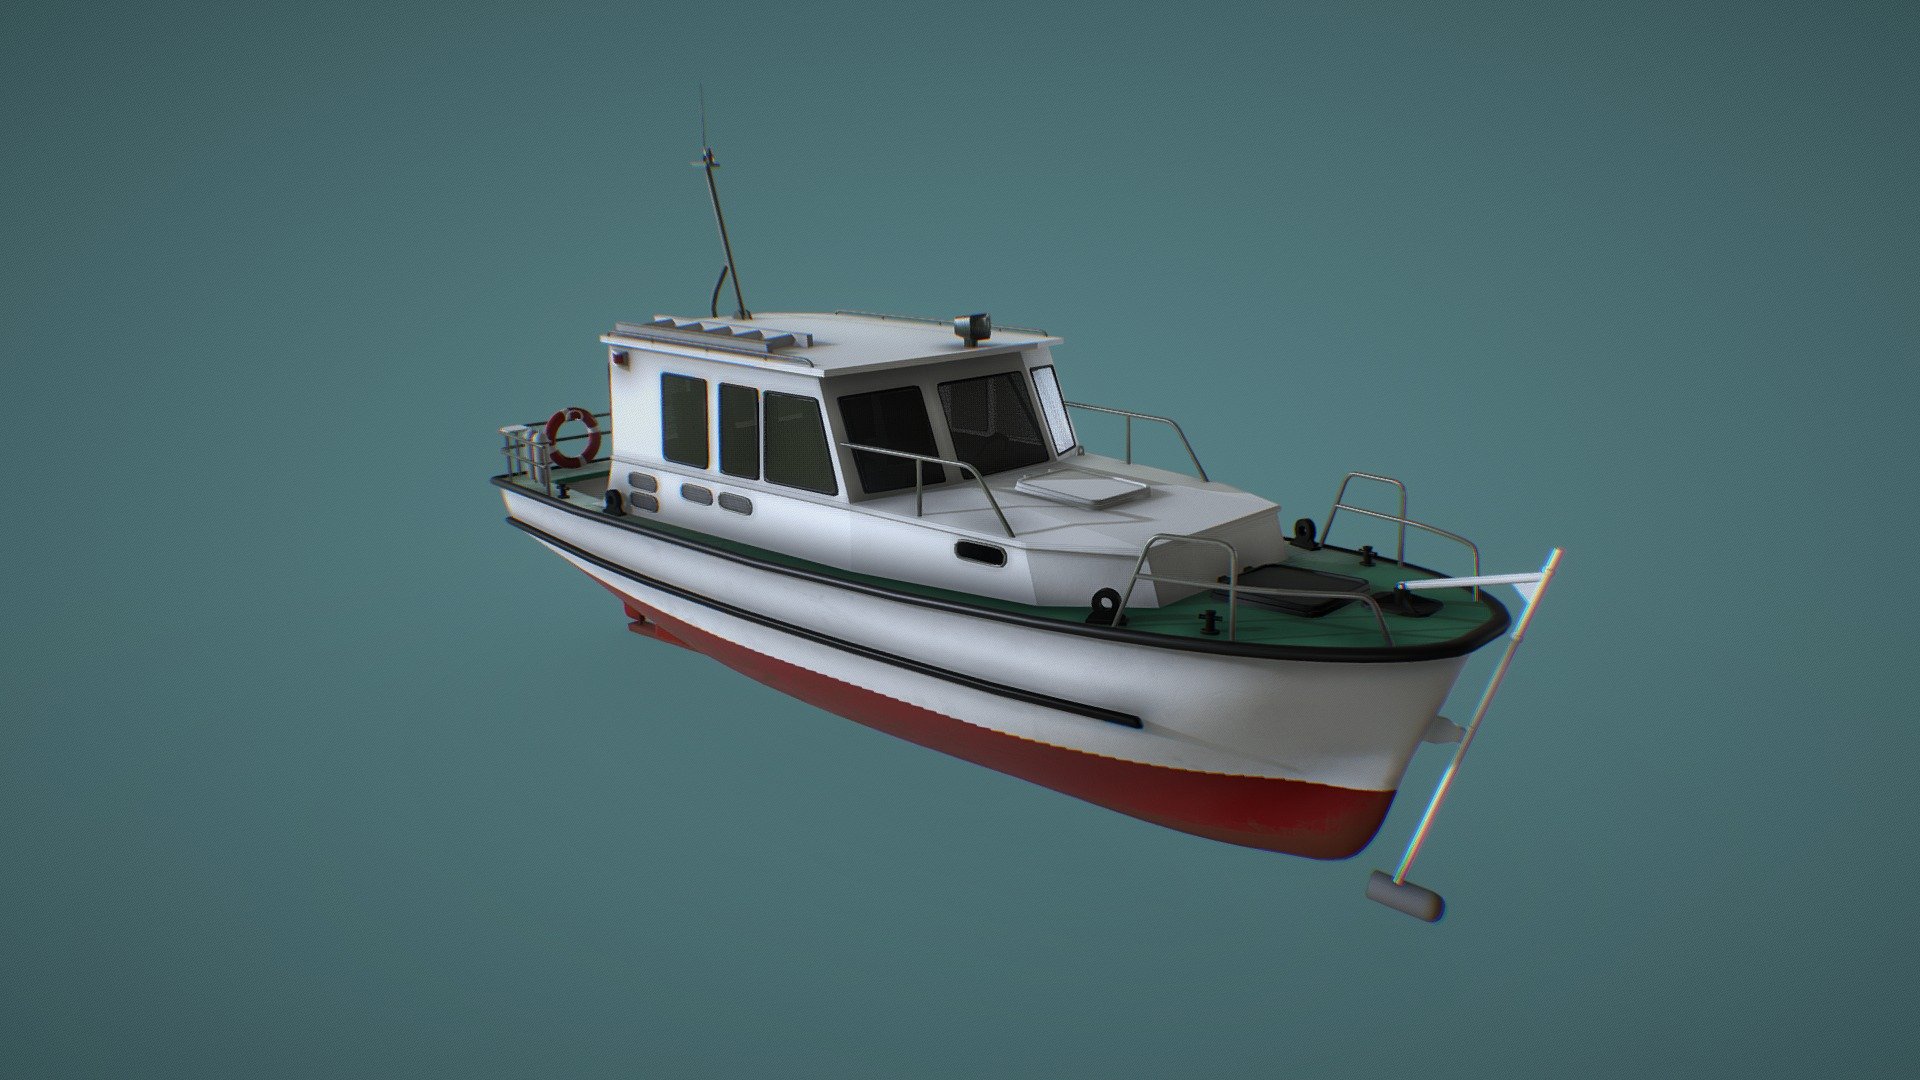 A low-poly game ready model of hydrographic boat of the project 21961 i made for @motionpix team. All work done in Blender 2.8 and Substance Painter. The model is ready for use in Unity HDRP 3d model